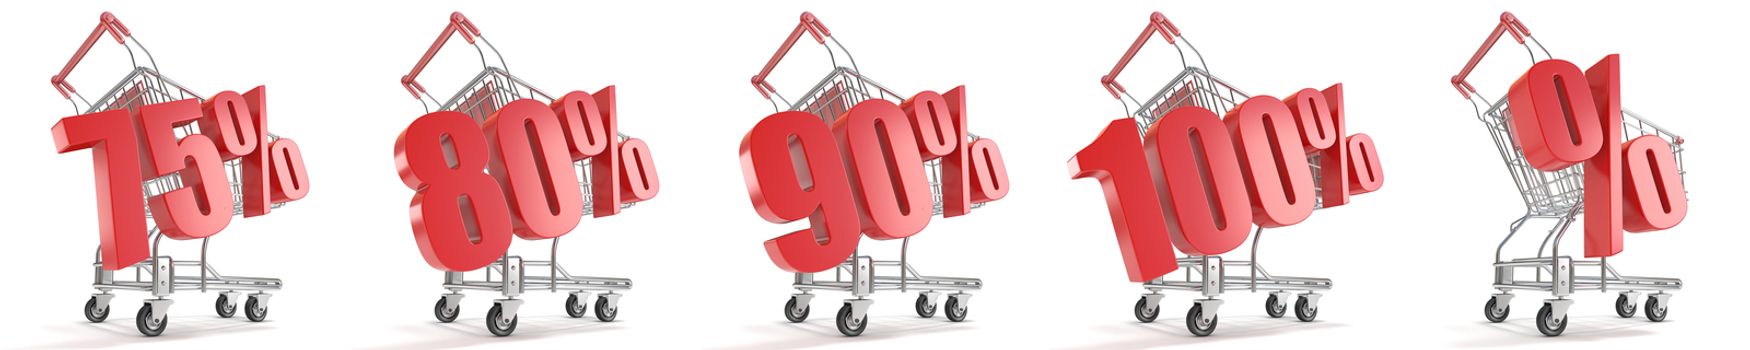 75%, 80%, 90%, 100%, % ercent discount in front of shopping cart. Sale concept. 3D render illustration isolated on white background